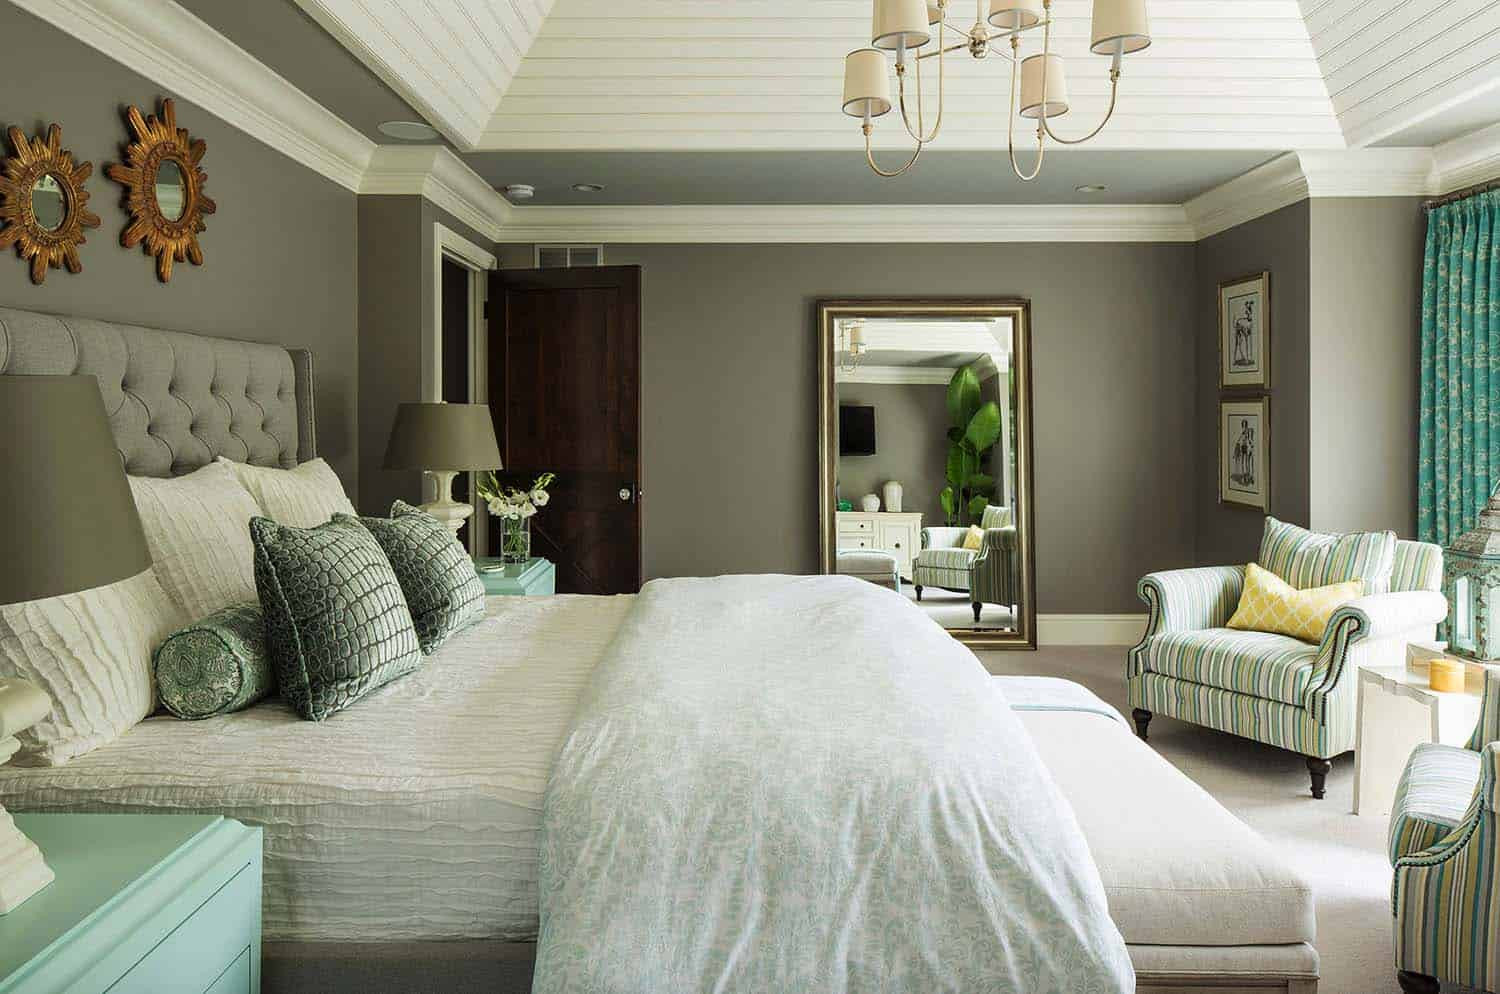 Master Bedroom Wall Colors
 25 Absolutely stunning master bedroom color scheme ideas